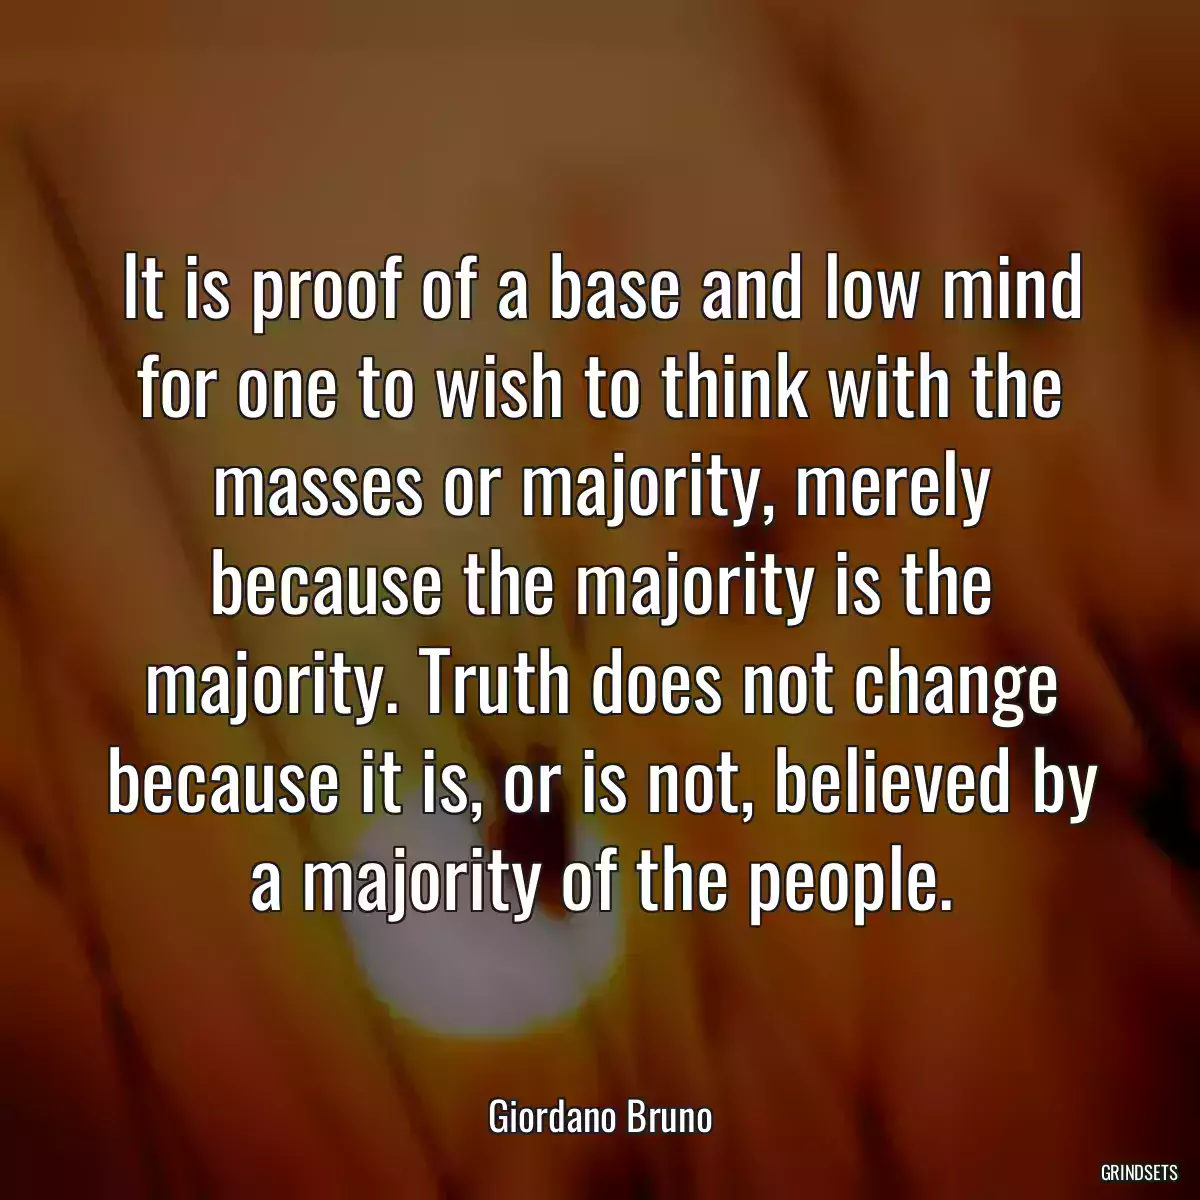 It is proof of a base and low mind for one to wish to think with the masses or majority, merely because the majority is the majority. Truth does not change because it is, or is not, believed by a majority of the people.